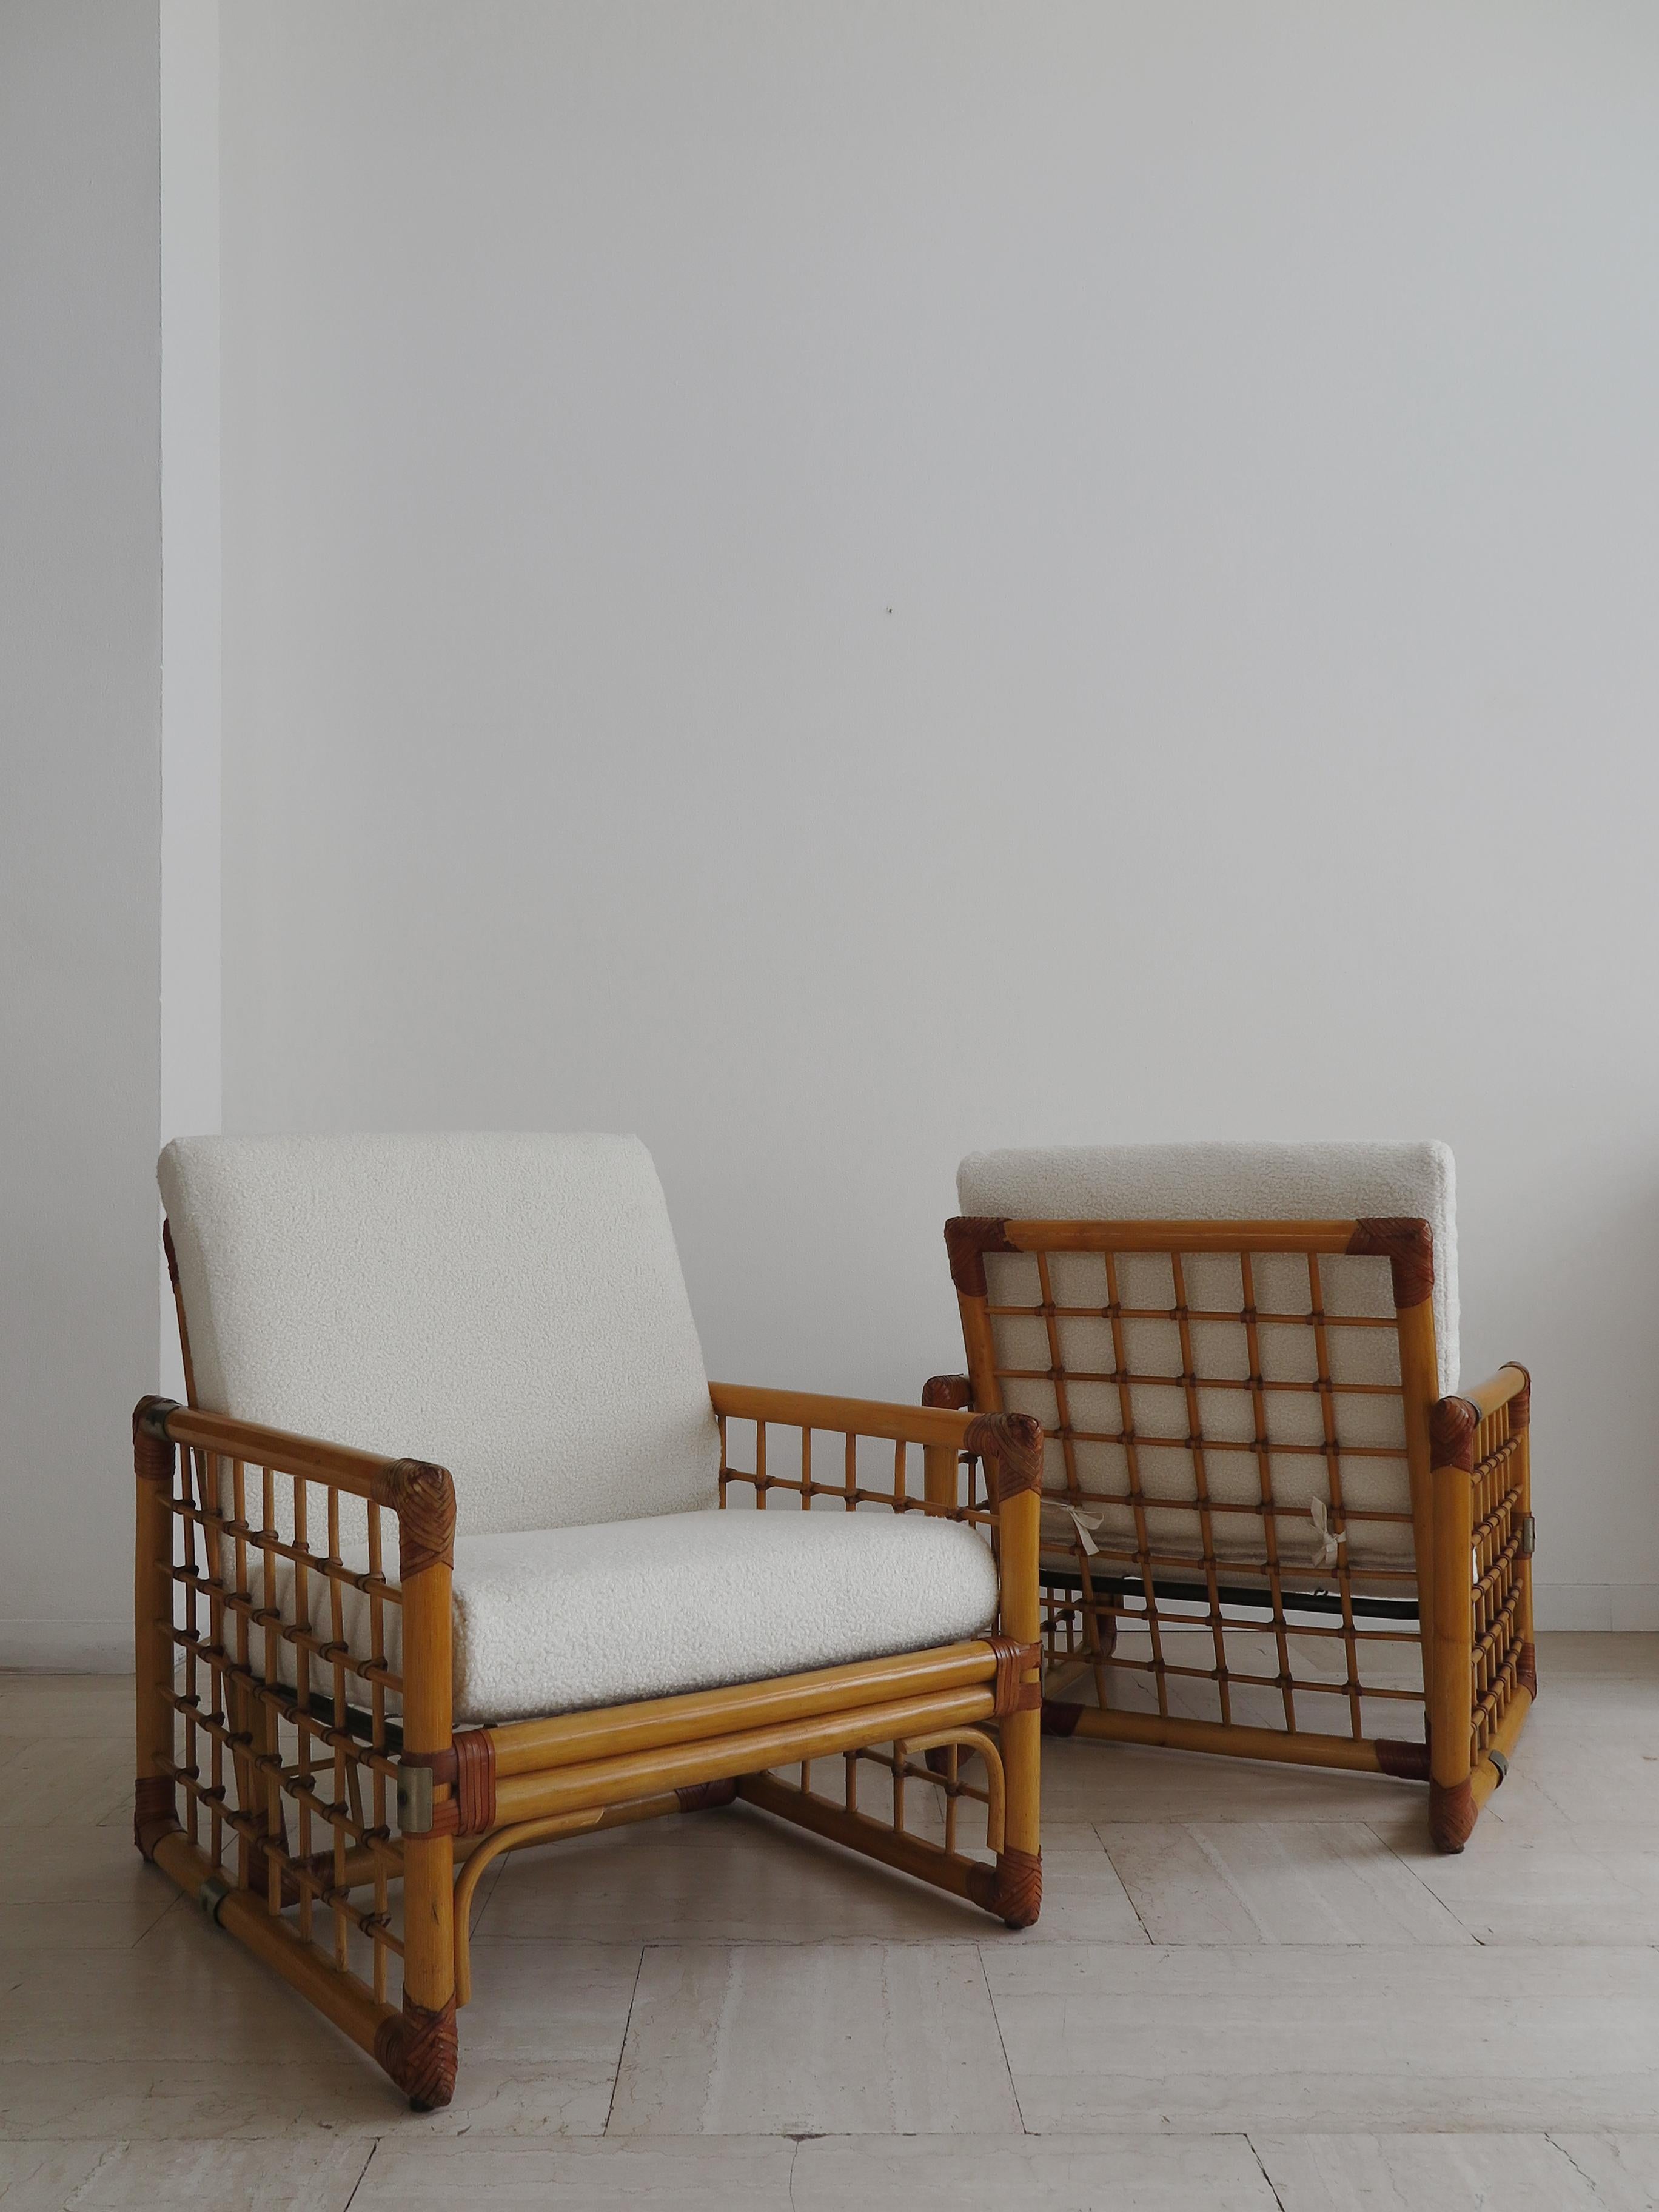 Post-Modern Bamboo, Indian Cane and Frabric Italian Armchairs, 1970s For Sale